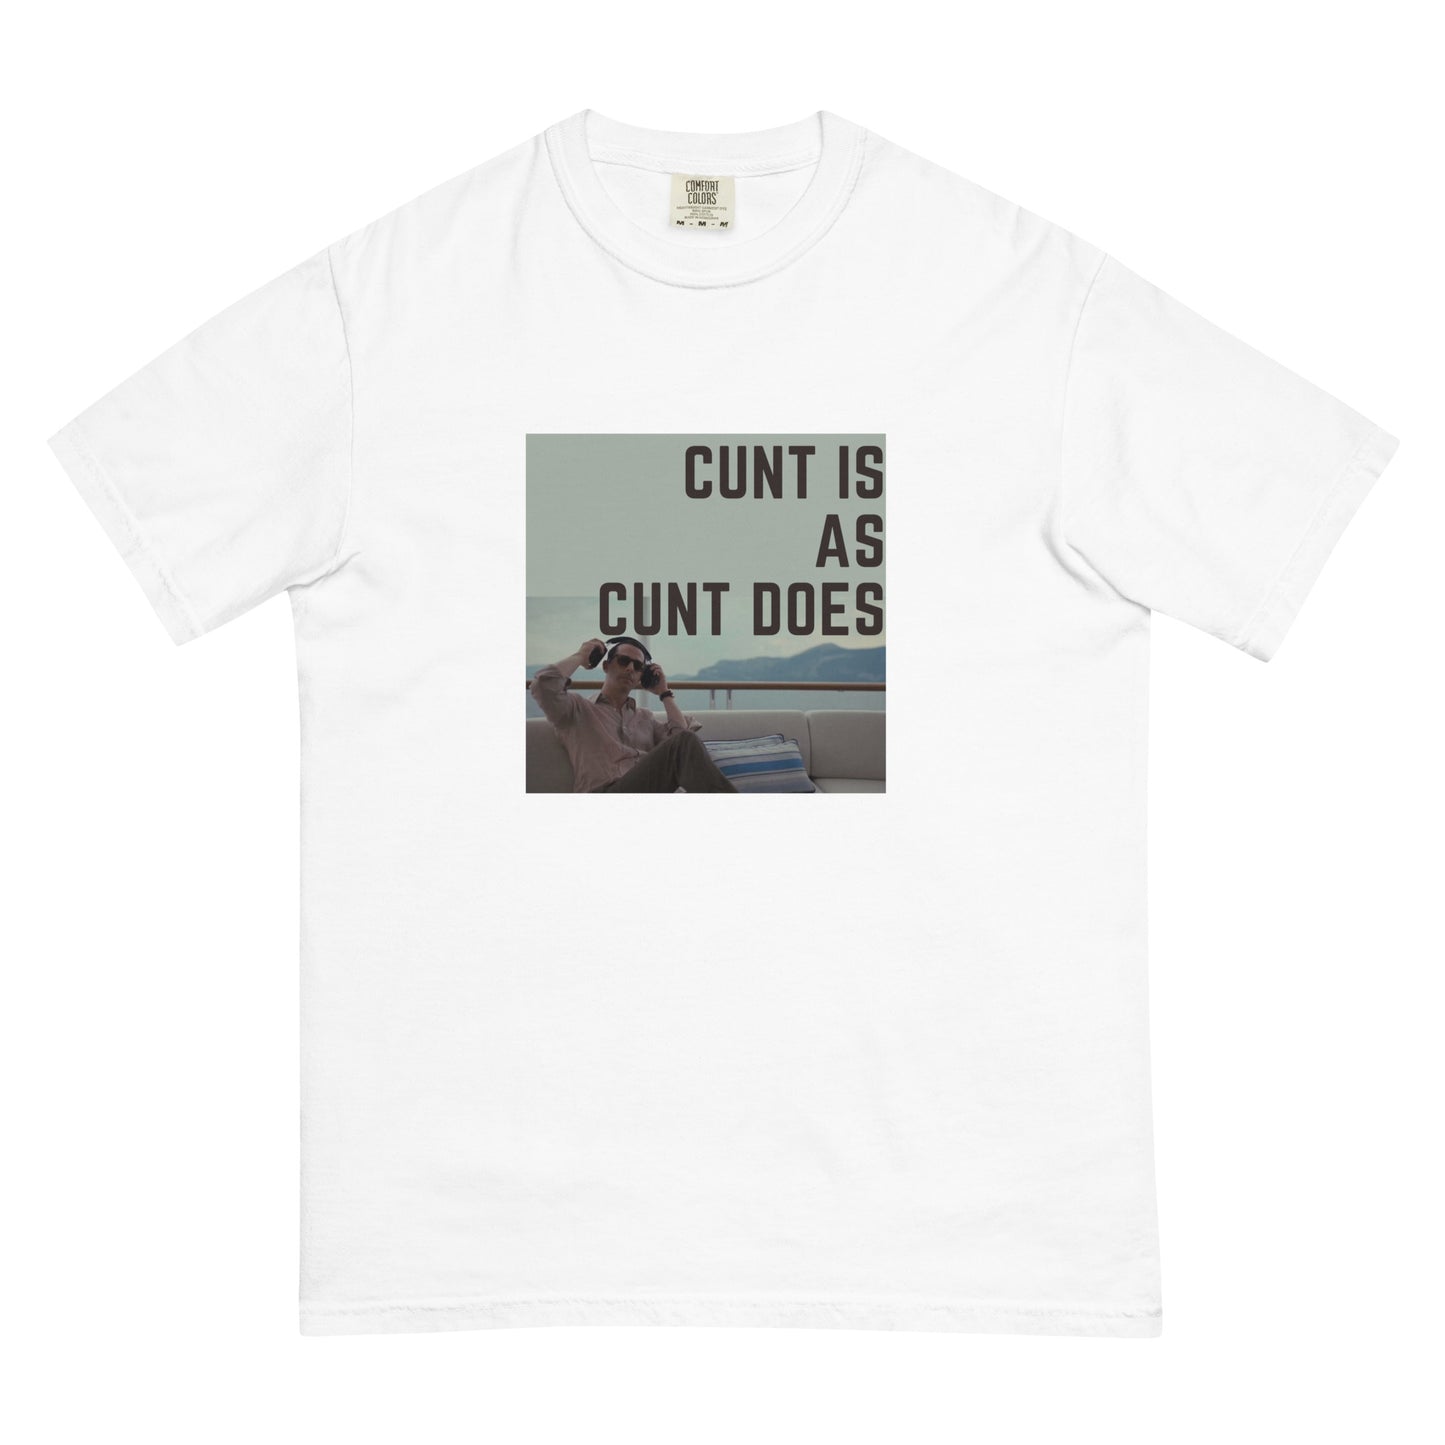 Cunt is as Cunt Does Kendall Roy Stan T-shirt ; Men’s garment-dyed heavyweight t-shirt ; Comfort Colors T-shirt